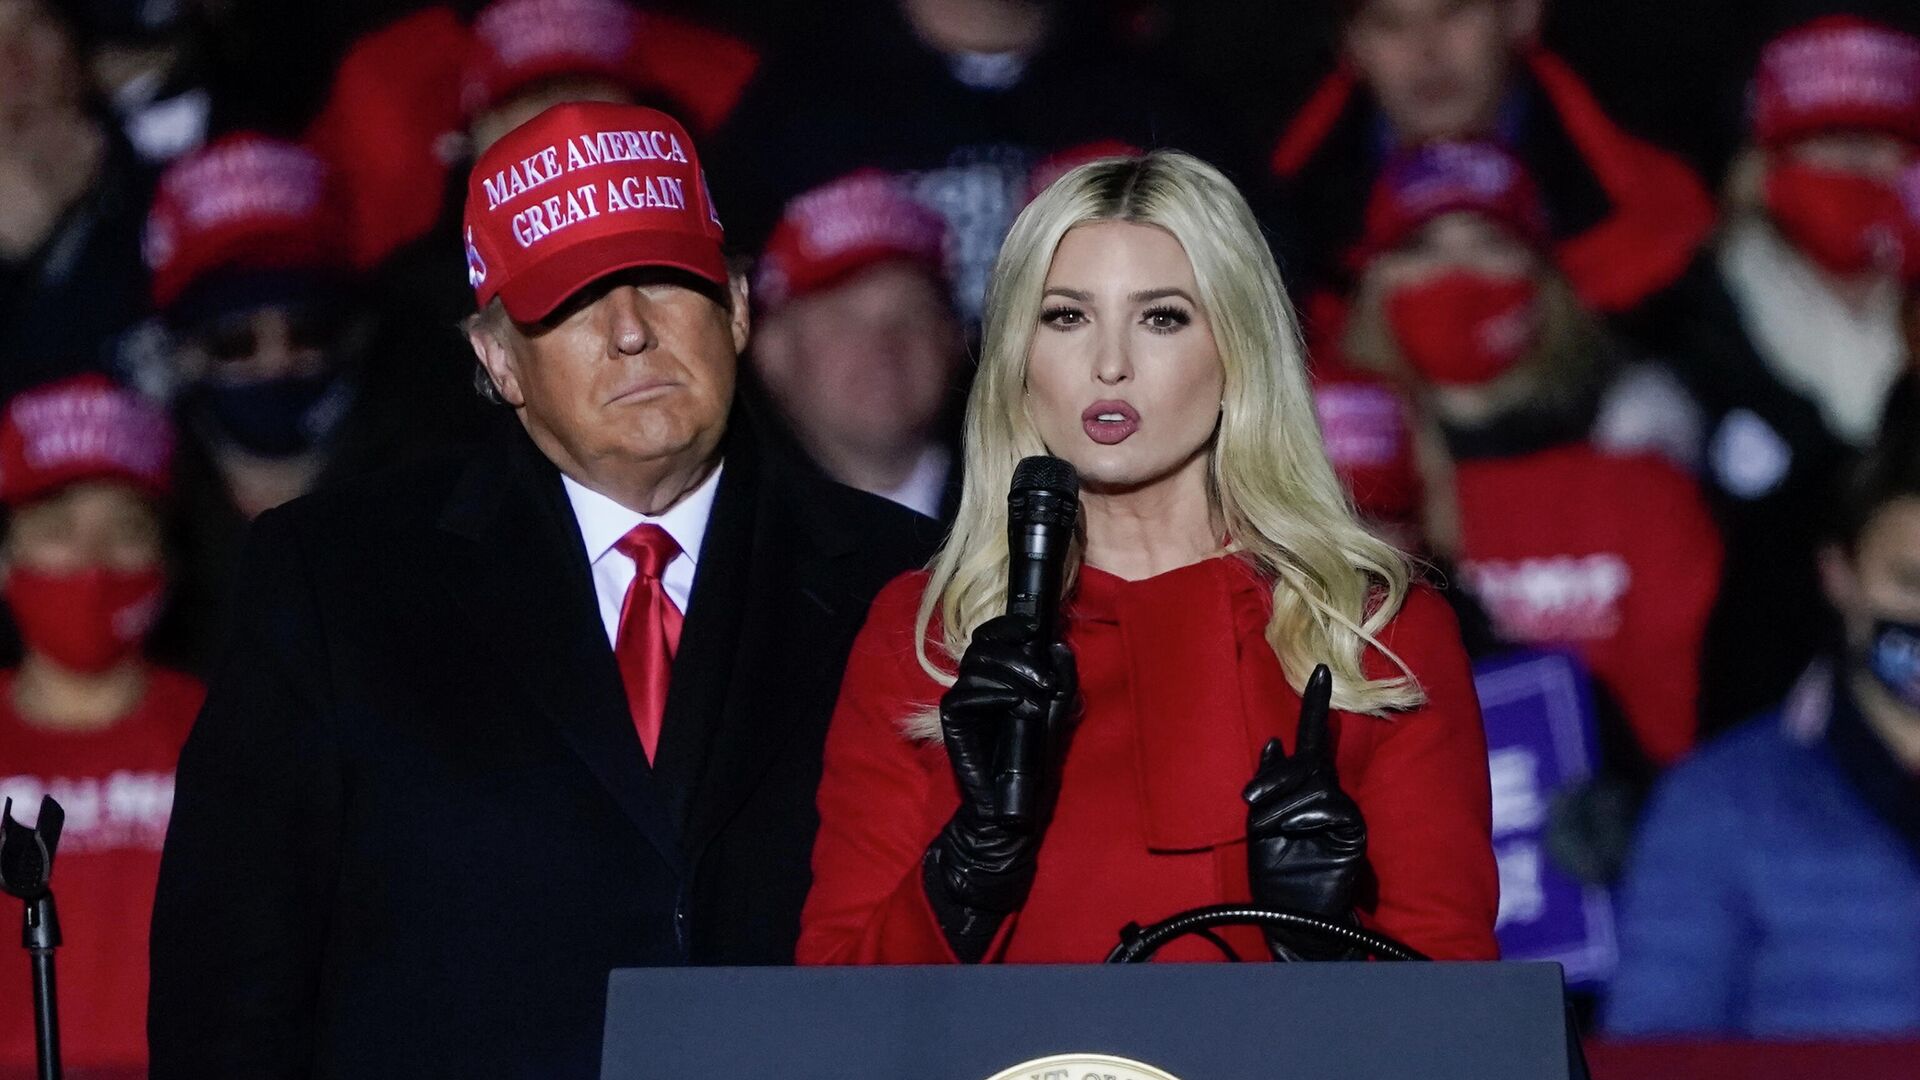 In this Nov. 2, 2020 file photo, Ivanka Trump speaks at a campaign event while her father, President Donald Trump, watches in Kenosha, Wis. New York's attorney general has sent a subpoena to the Trump Organization for records related to consulting fees paid to Ivanka Trump as part of a broad civil investigation into the president's business dealings, a law enforcement official said Thursday, Nov. 19, 2020 - Sputnik International, 1920, 10.06.2022